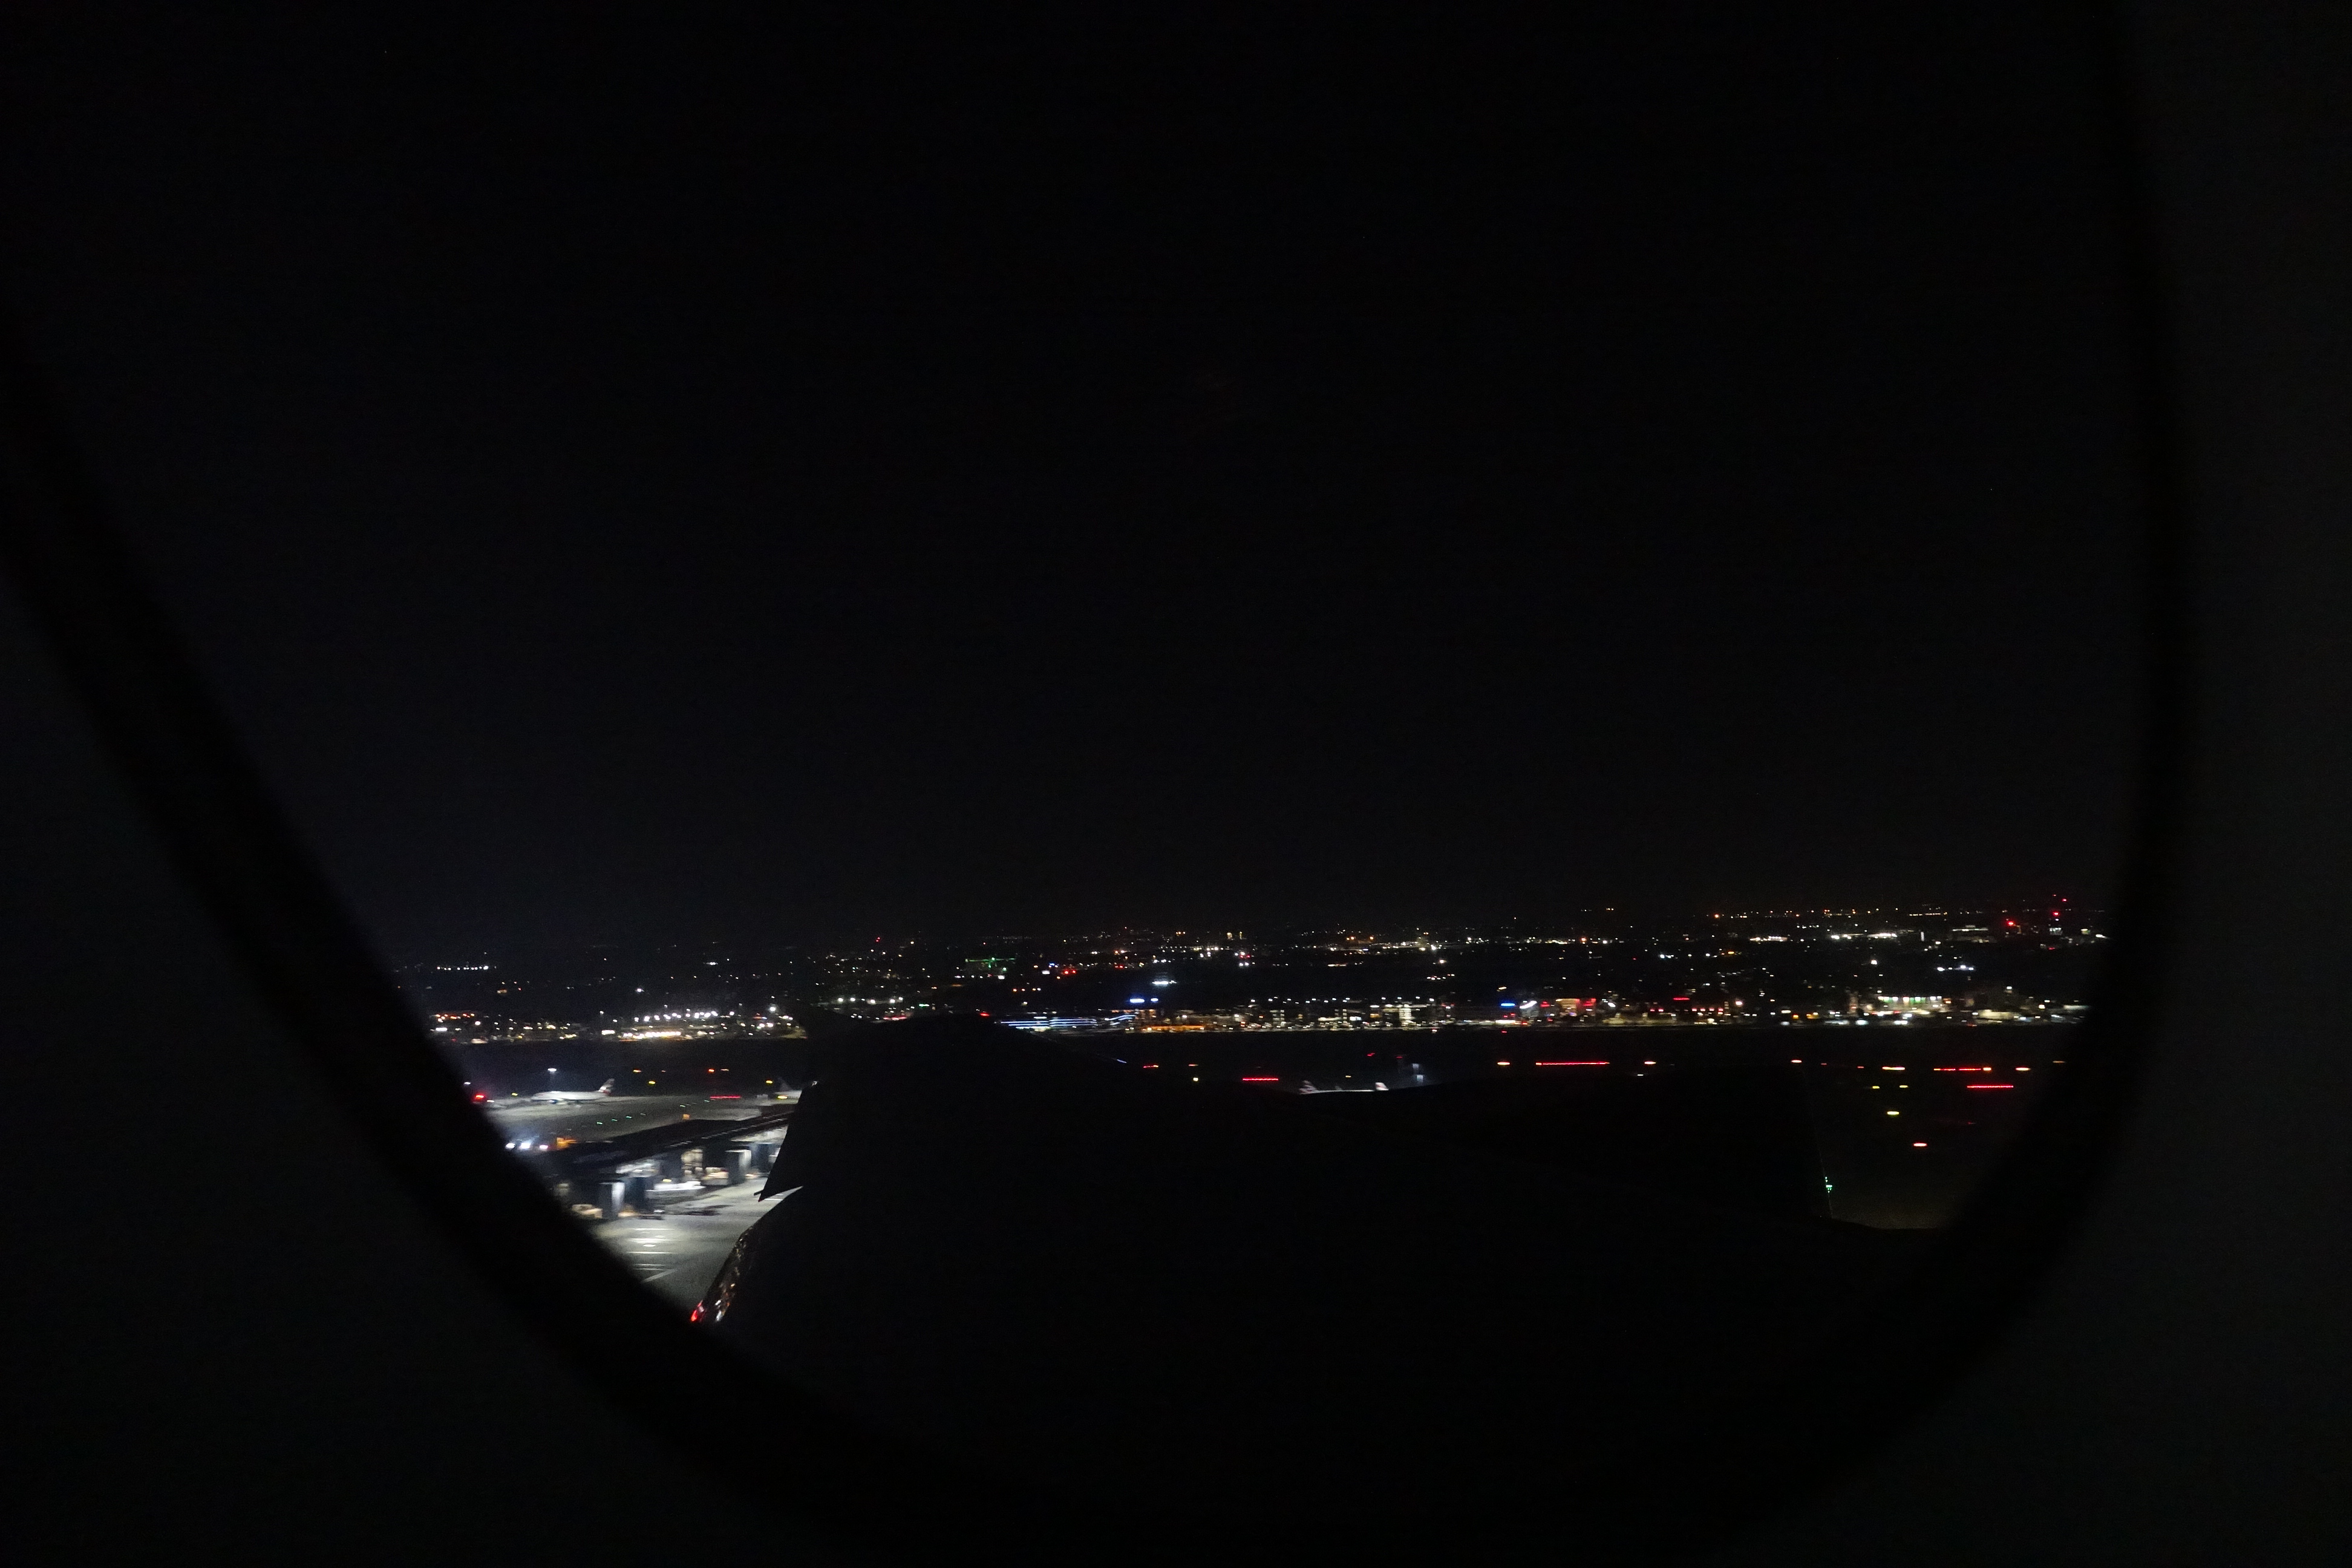 a view of a city at night from a plane window